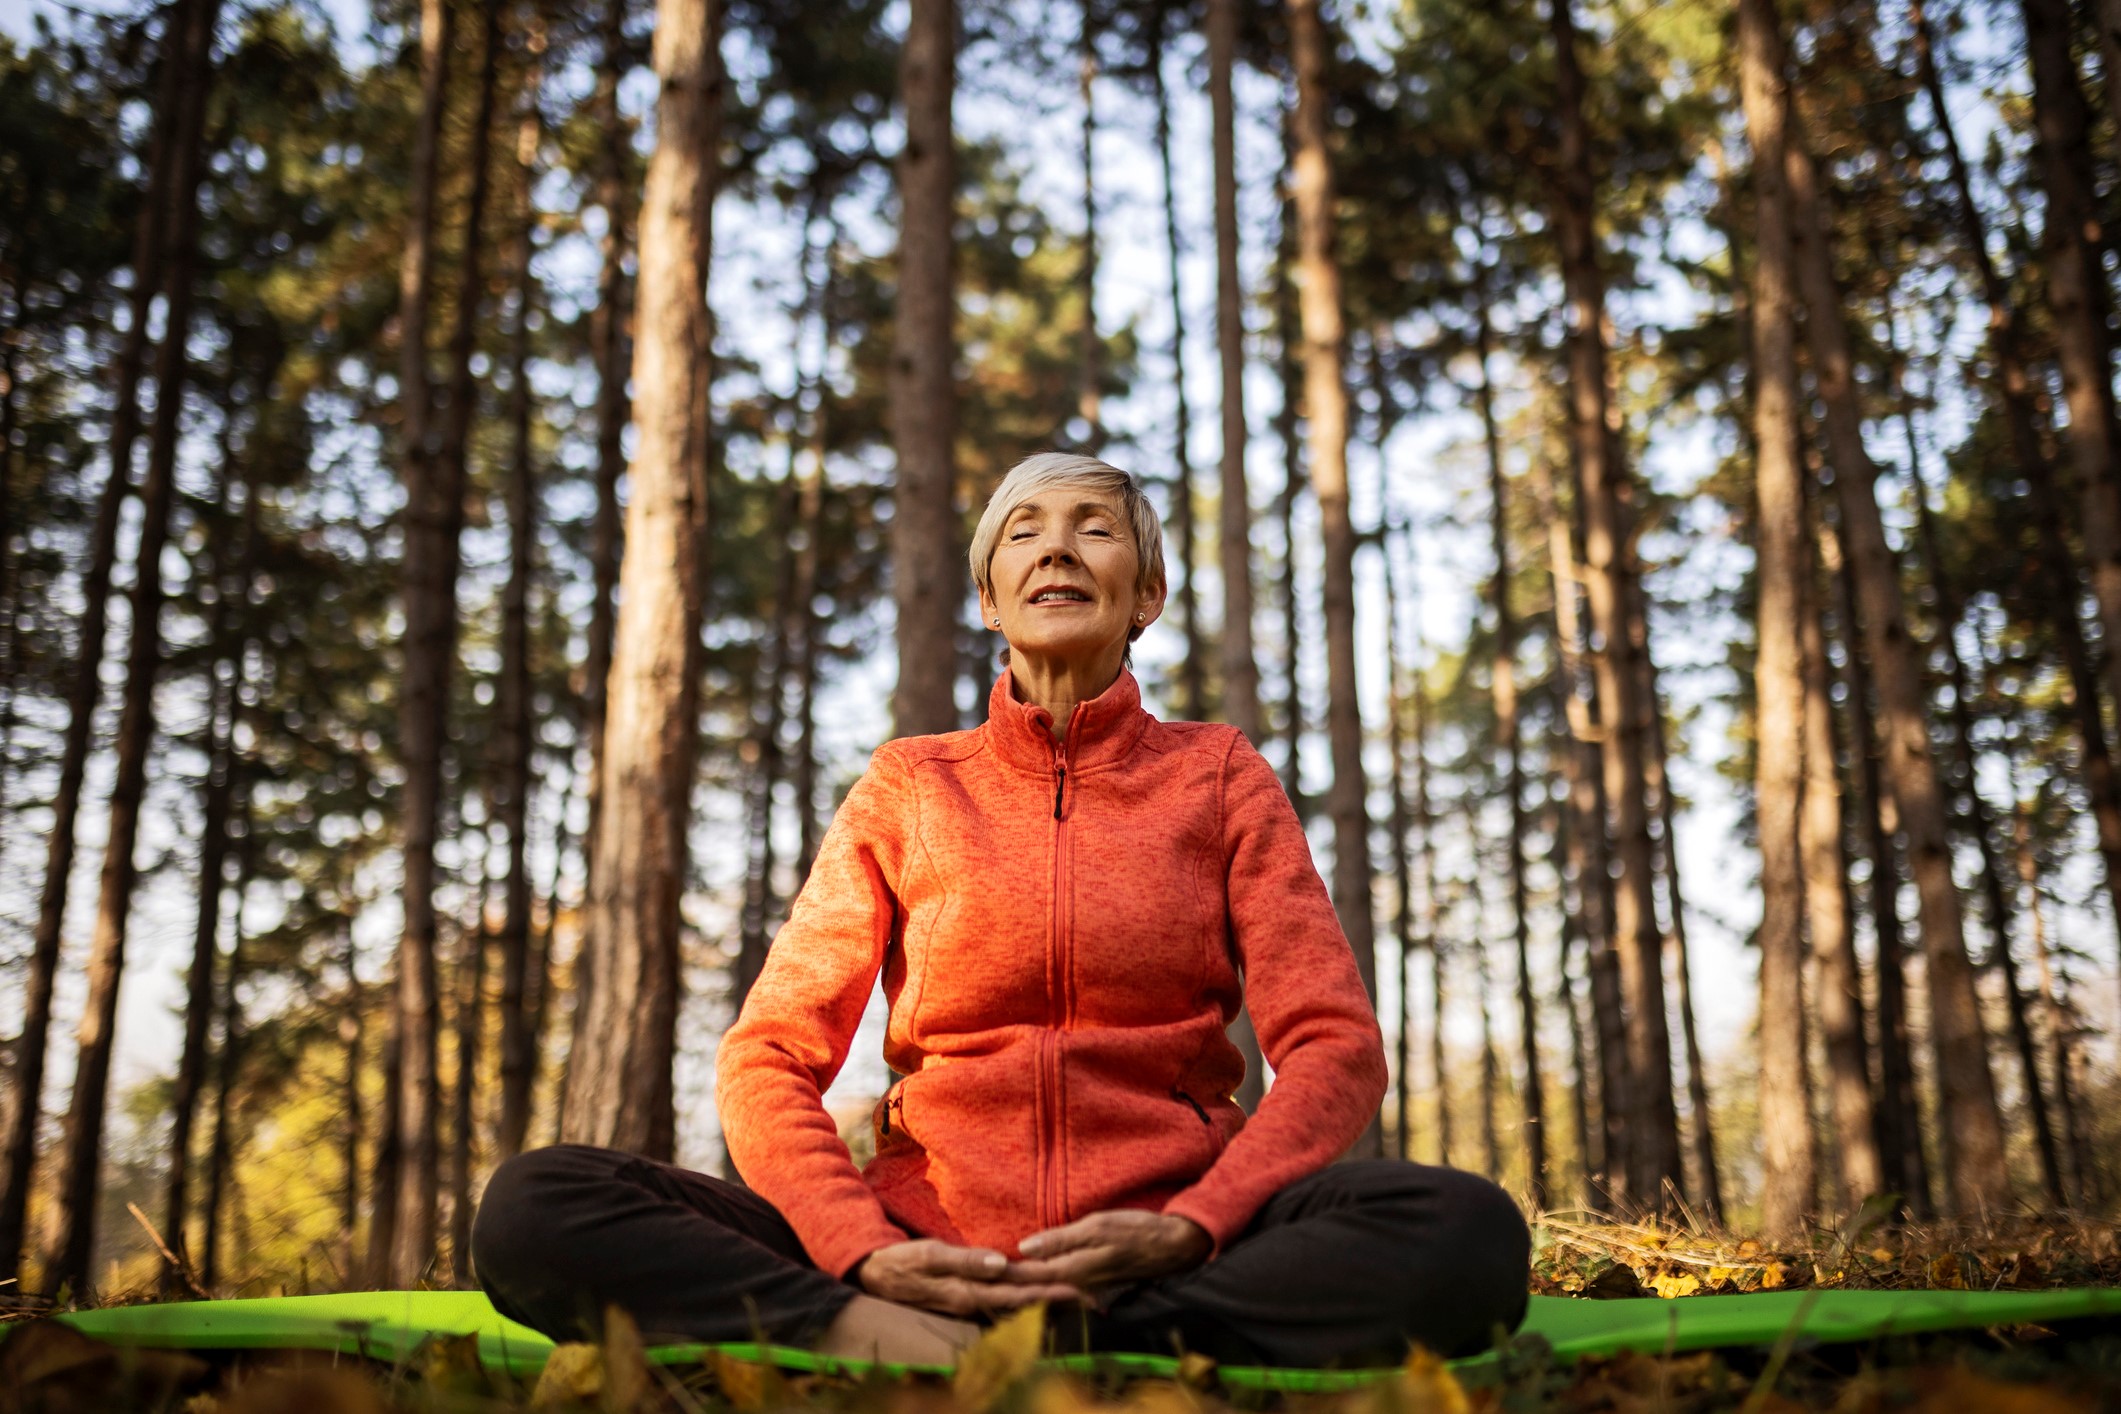 What Is the Best Type of Yoga for Seniors? - Senior Services of America